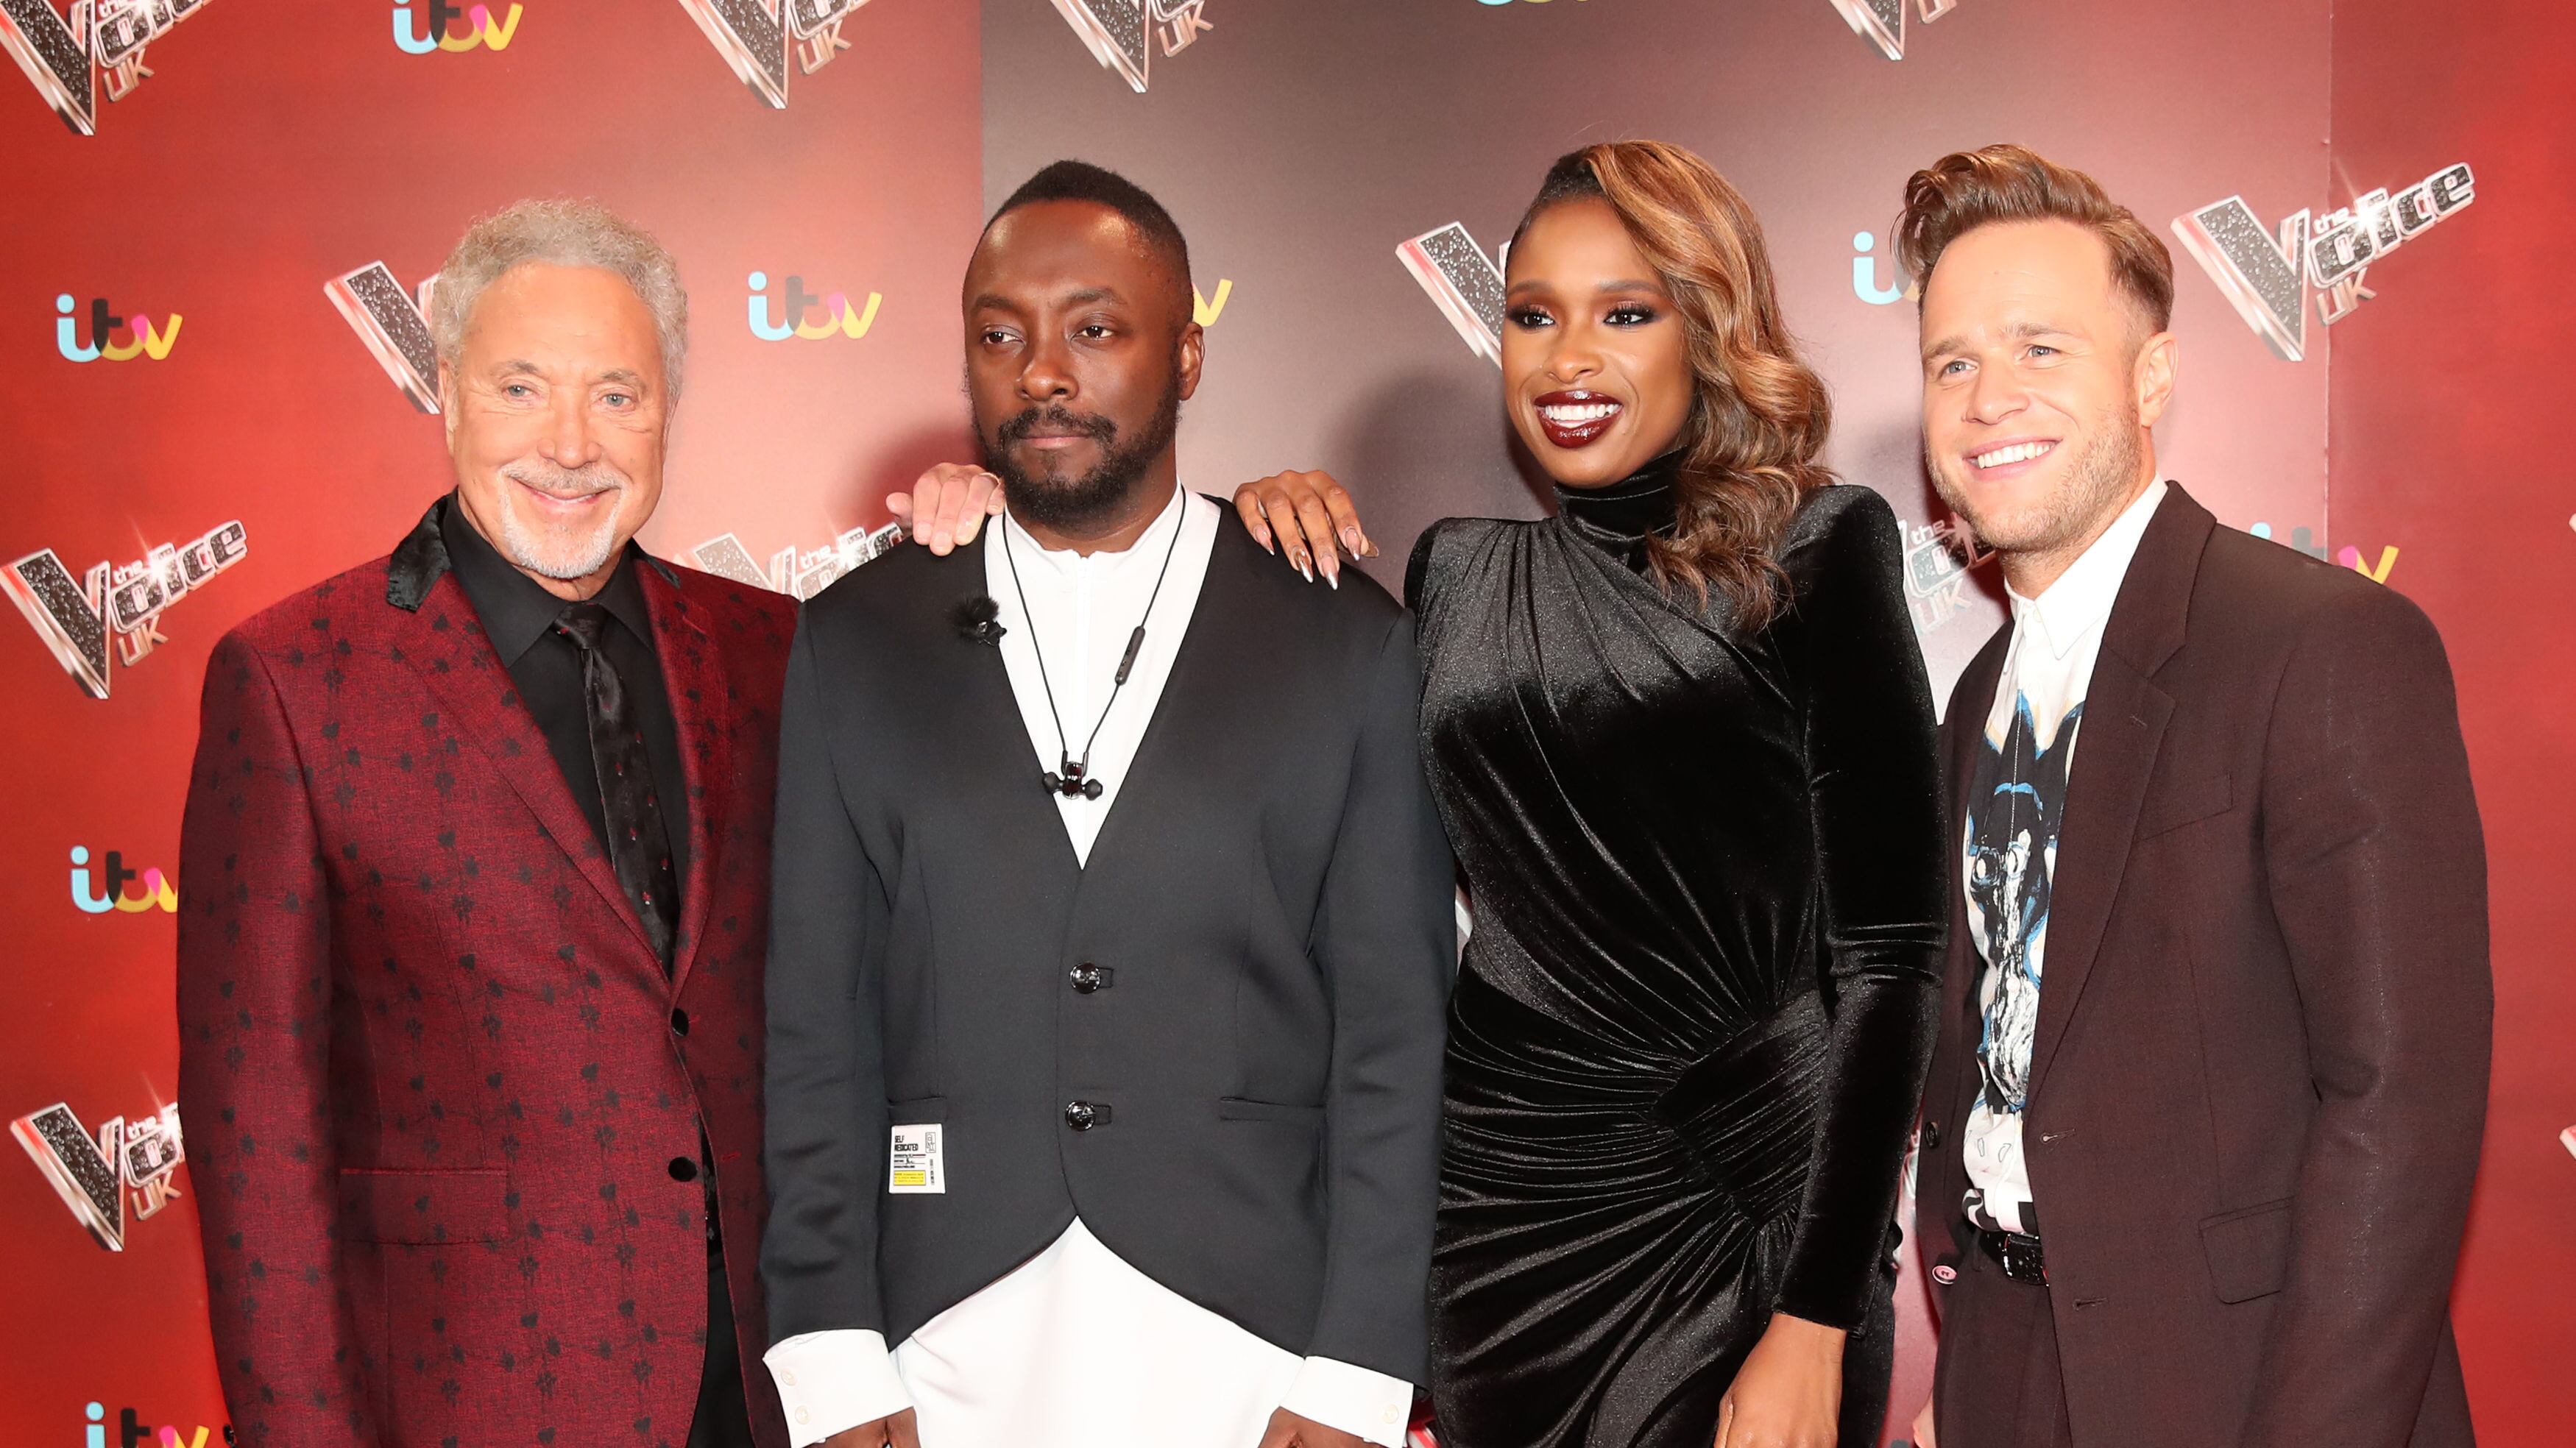 The Voice UK coaches Will.i.am, and Sir Tom Jones